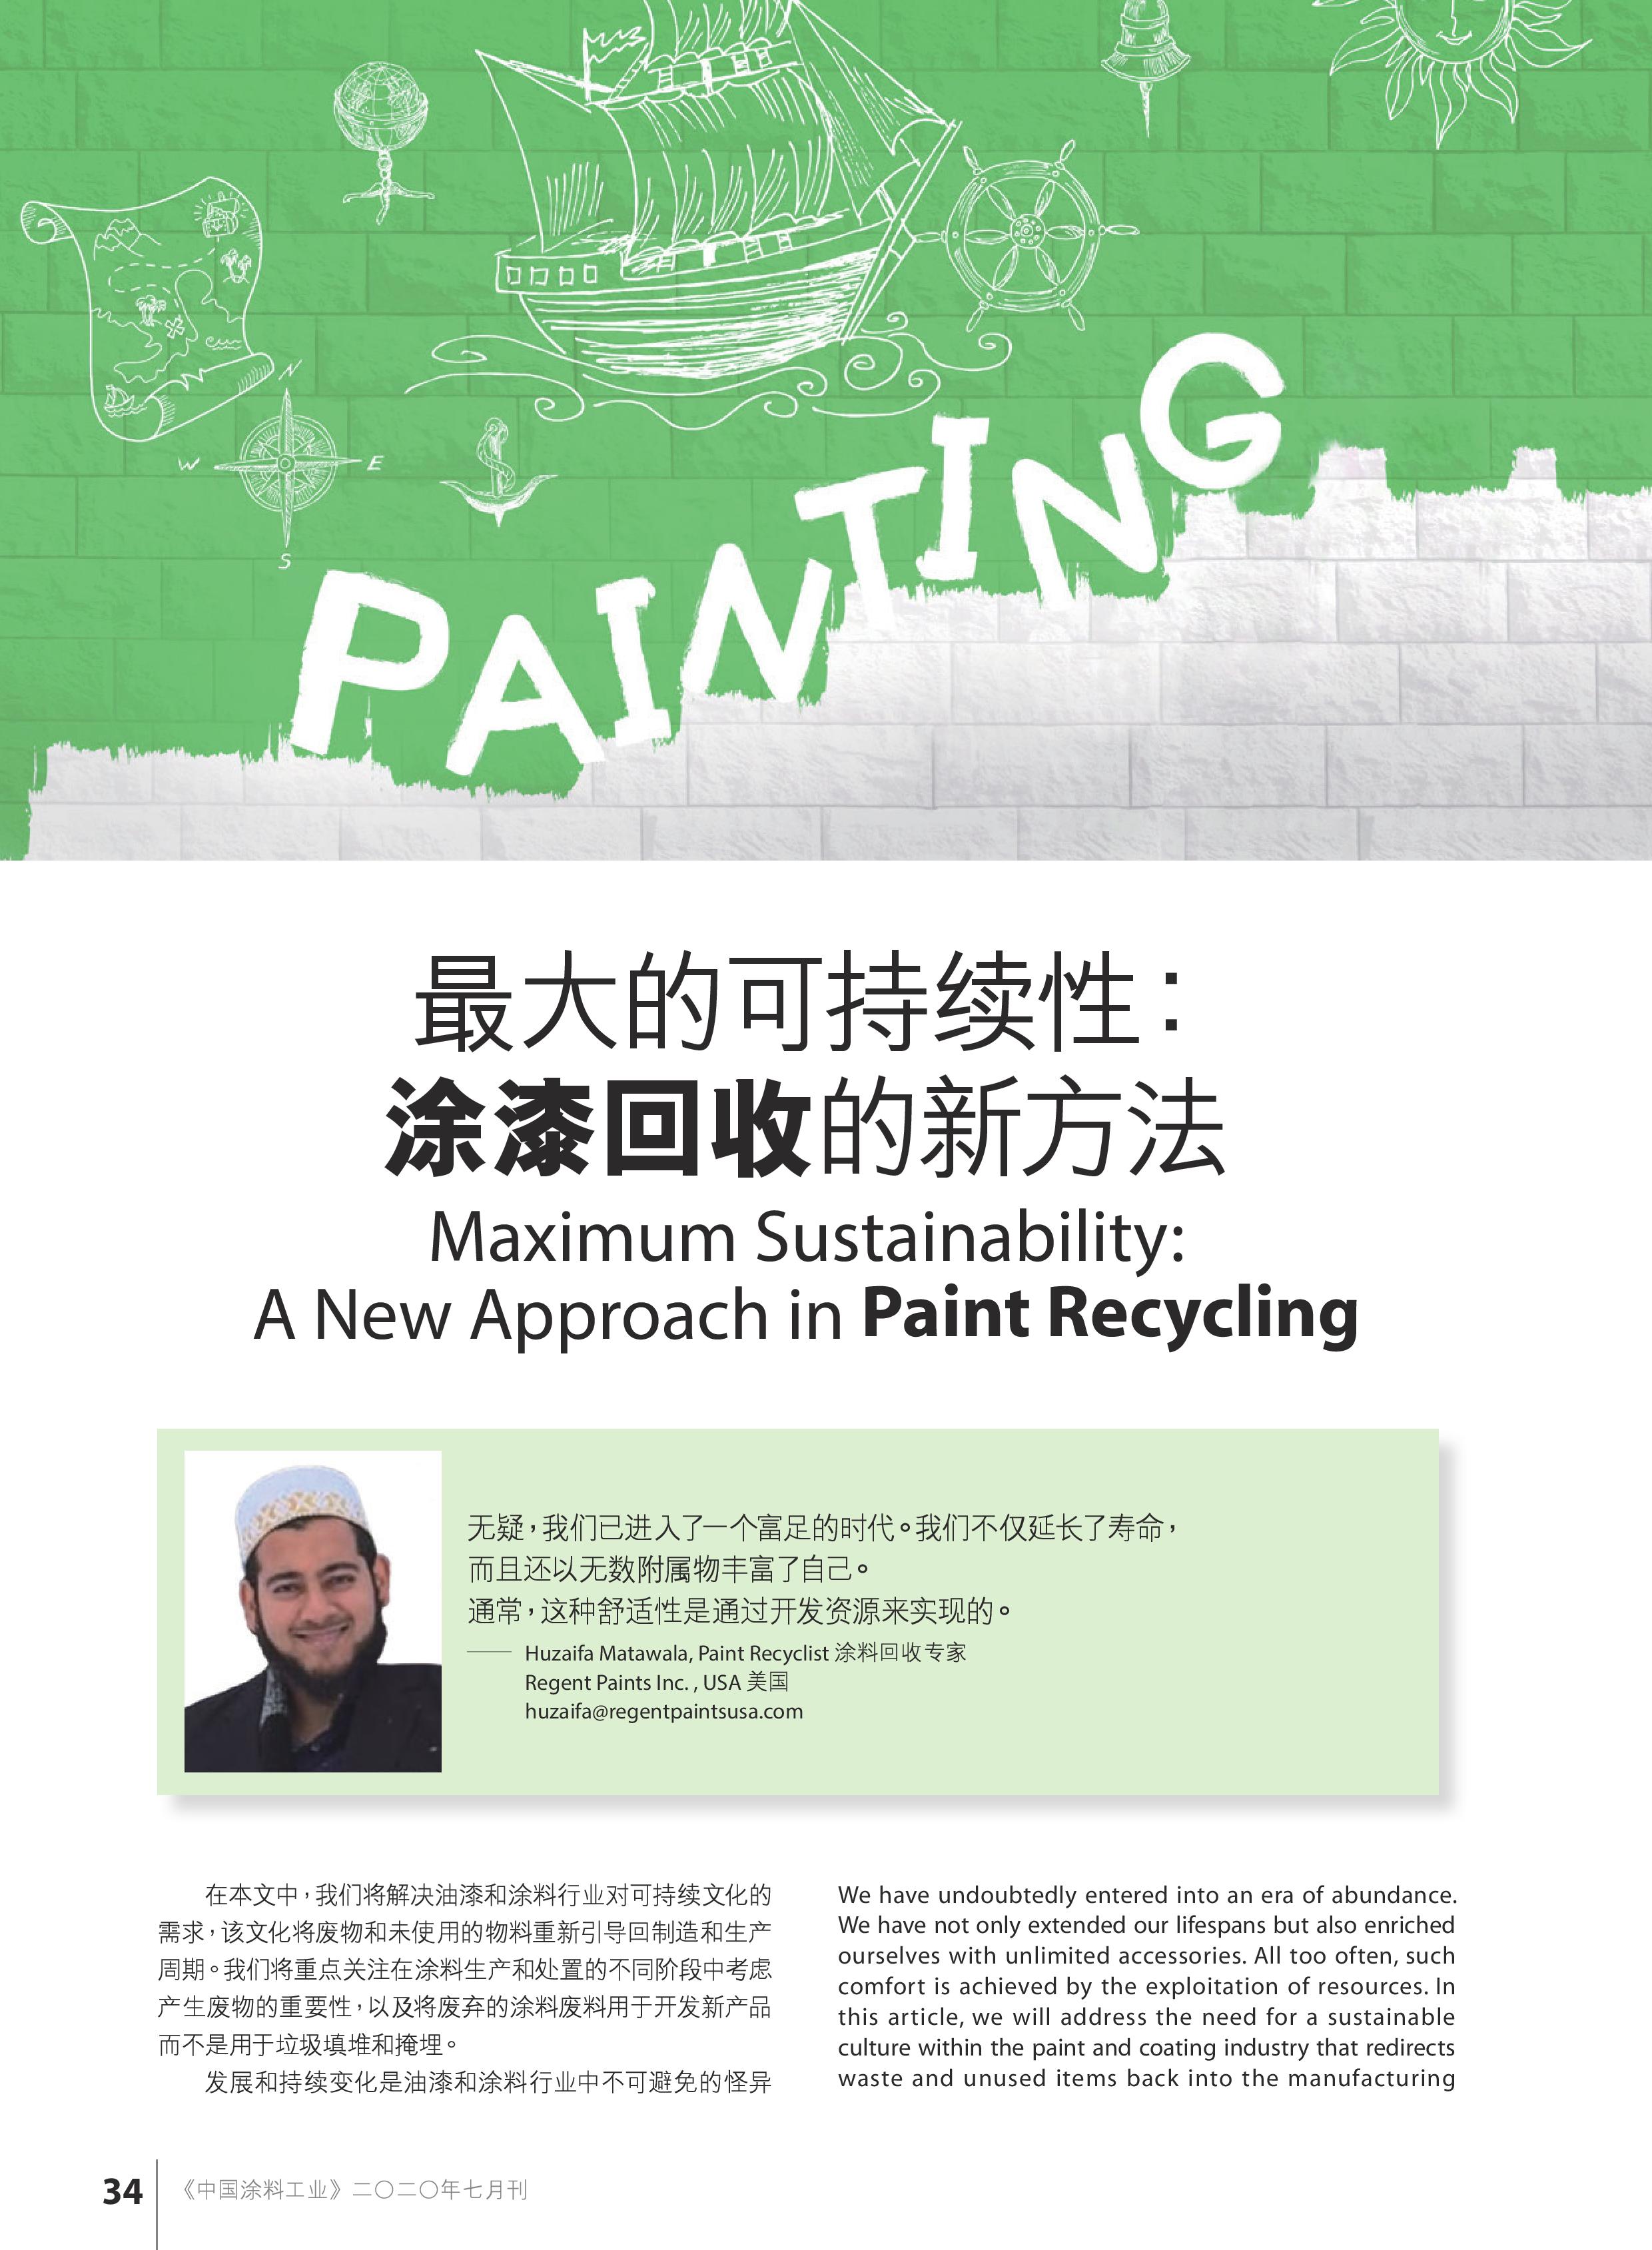 Maximum sustainability - A new approach in paint recycling